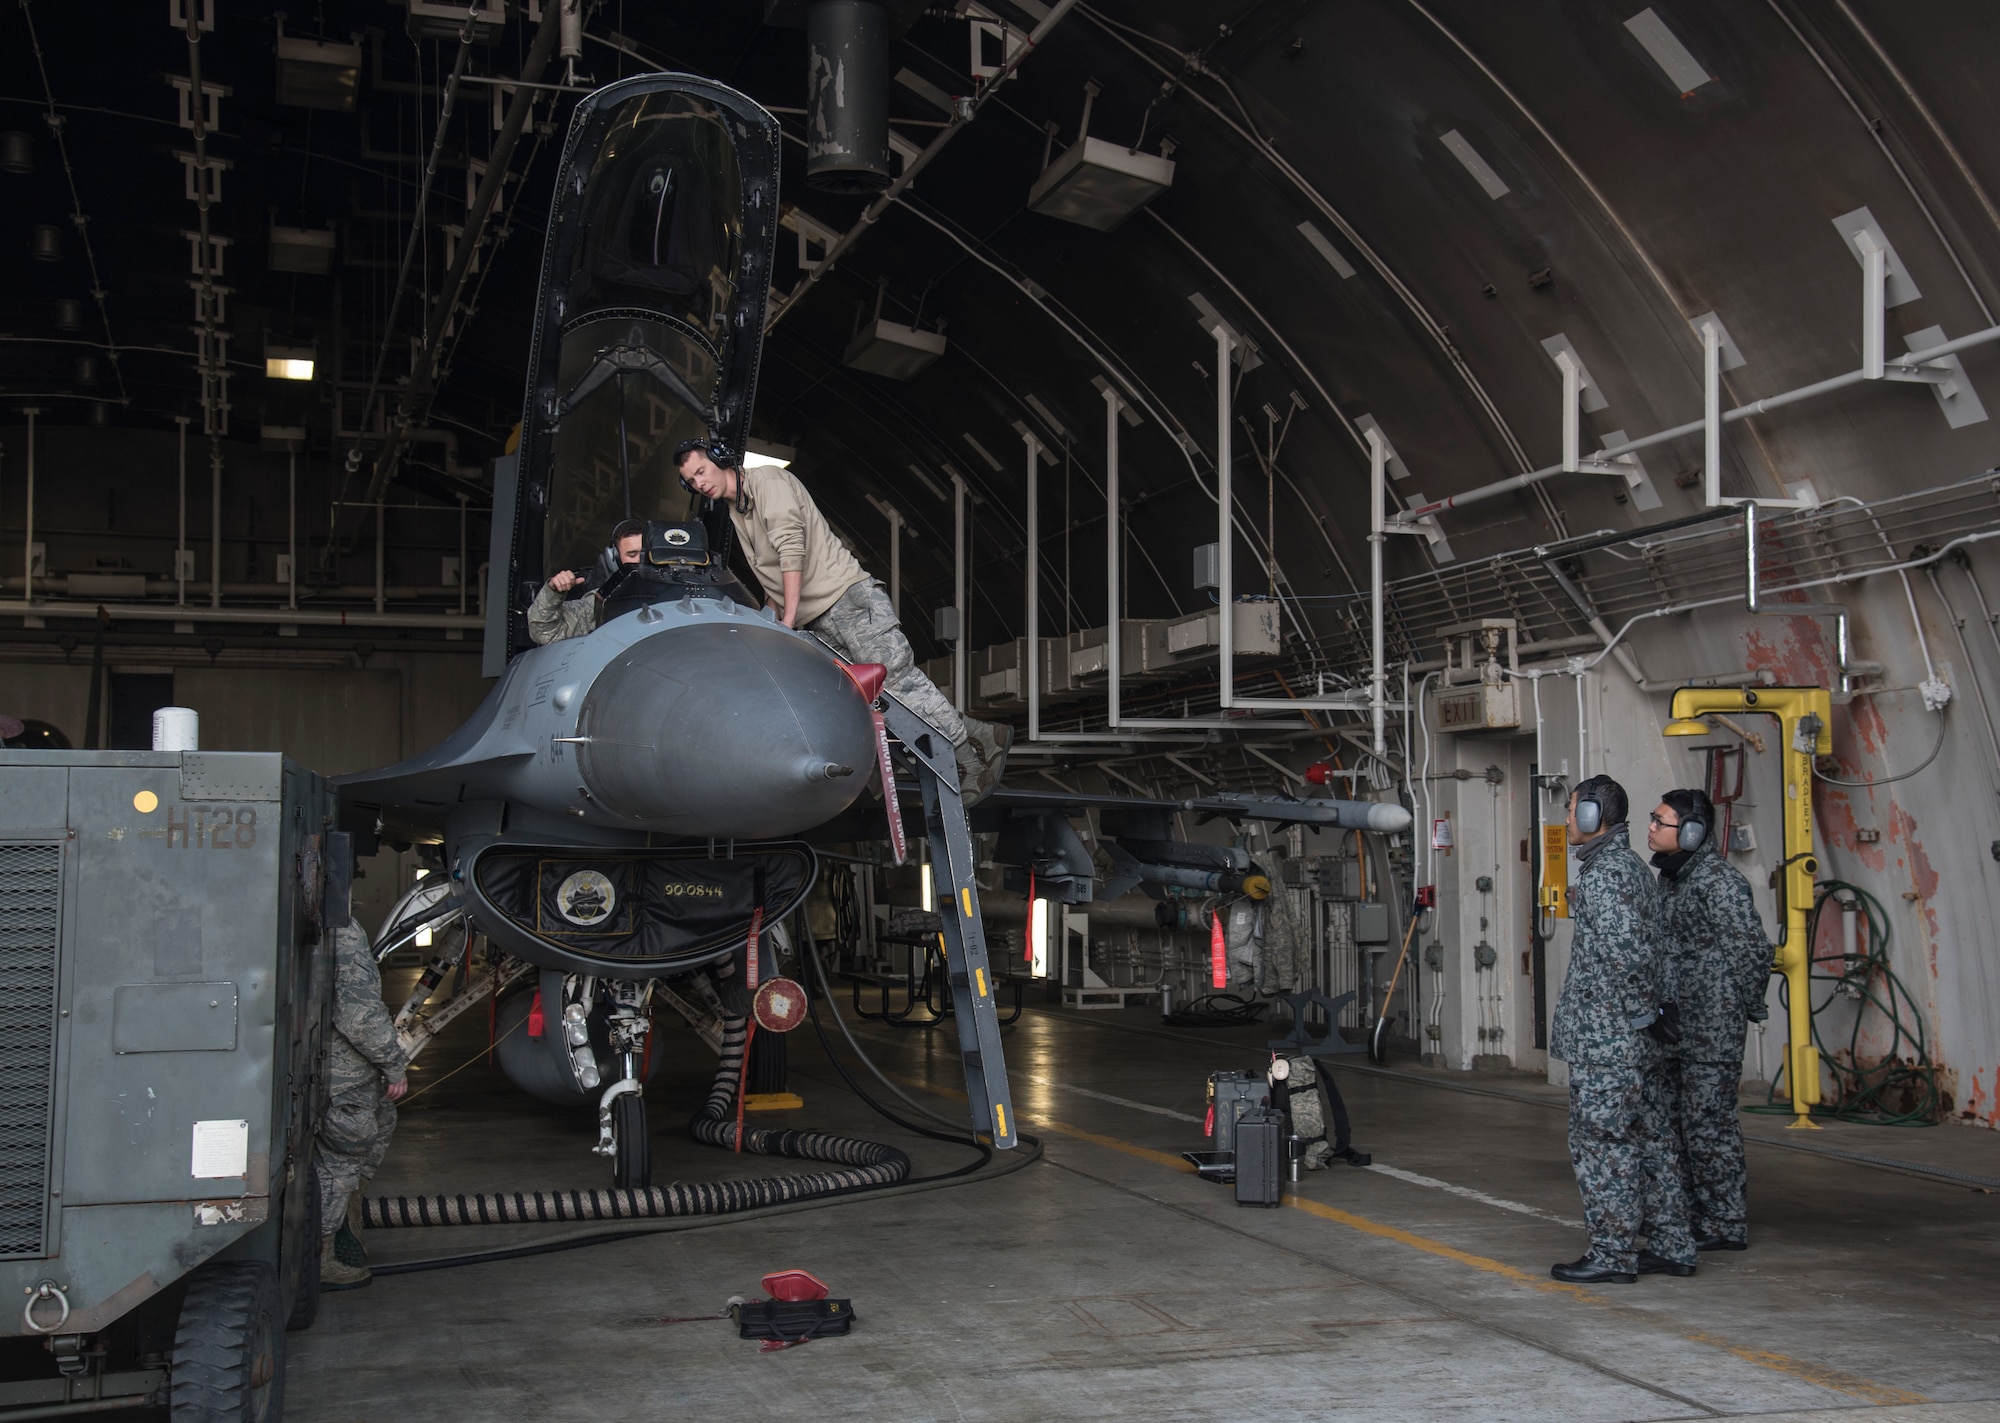 U.S. Air Forec Airman 1st Class Glenn Koontz, left, and Senior Airman Corey Robinson, center right, both 14th Aircraft Maintenance Unit electrical and environmental technicians, work on an F-16 Fighting Falcon as Japan Air Self-Defense Force Staff Sgts. Narihito Tanaka, center left, and Kenta Okazaki, right, sepctate aircraft procedures at Misawa Air Base, Japan, Dec. 7, 2016. Eight enlisted and two officers from multiple JASDF bases across Northern Japan participated in a bilateral exchange to learn maintenance procedures. (U.S. Air Force photo by Airman 1st Class Sadie Colbert)